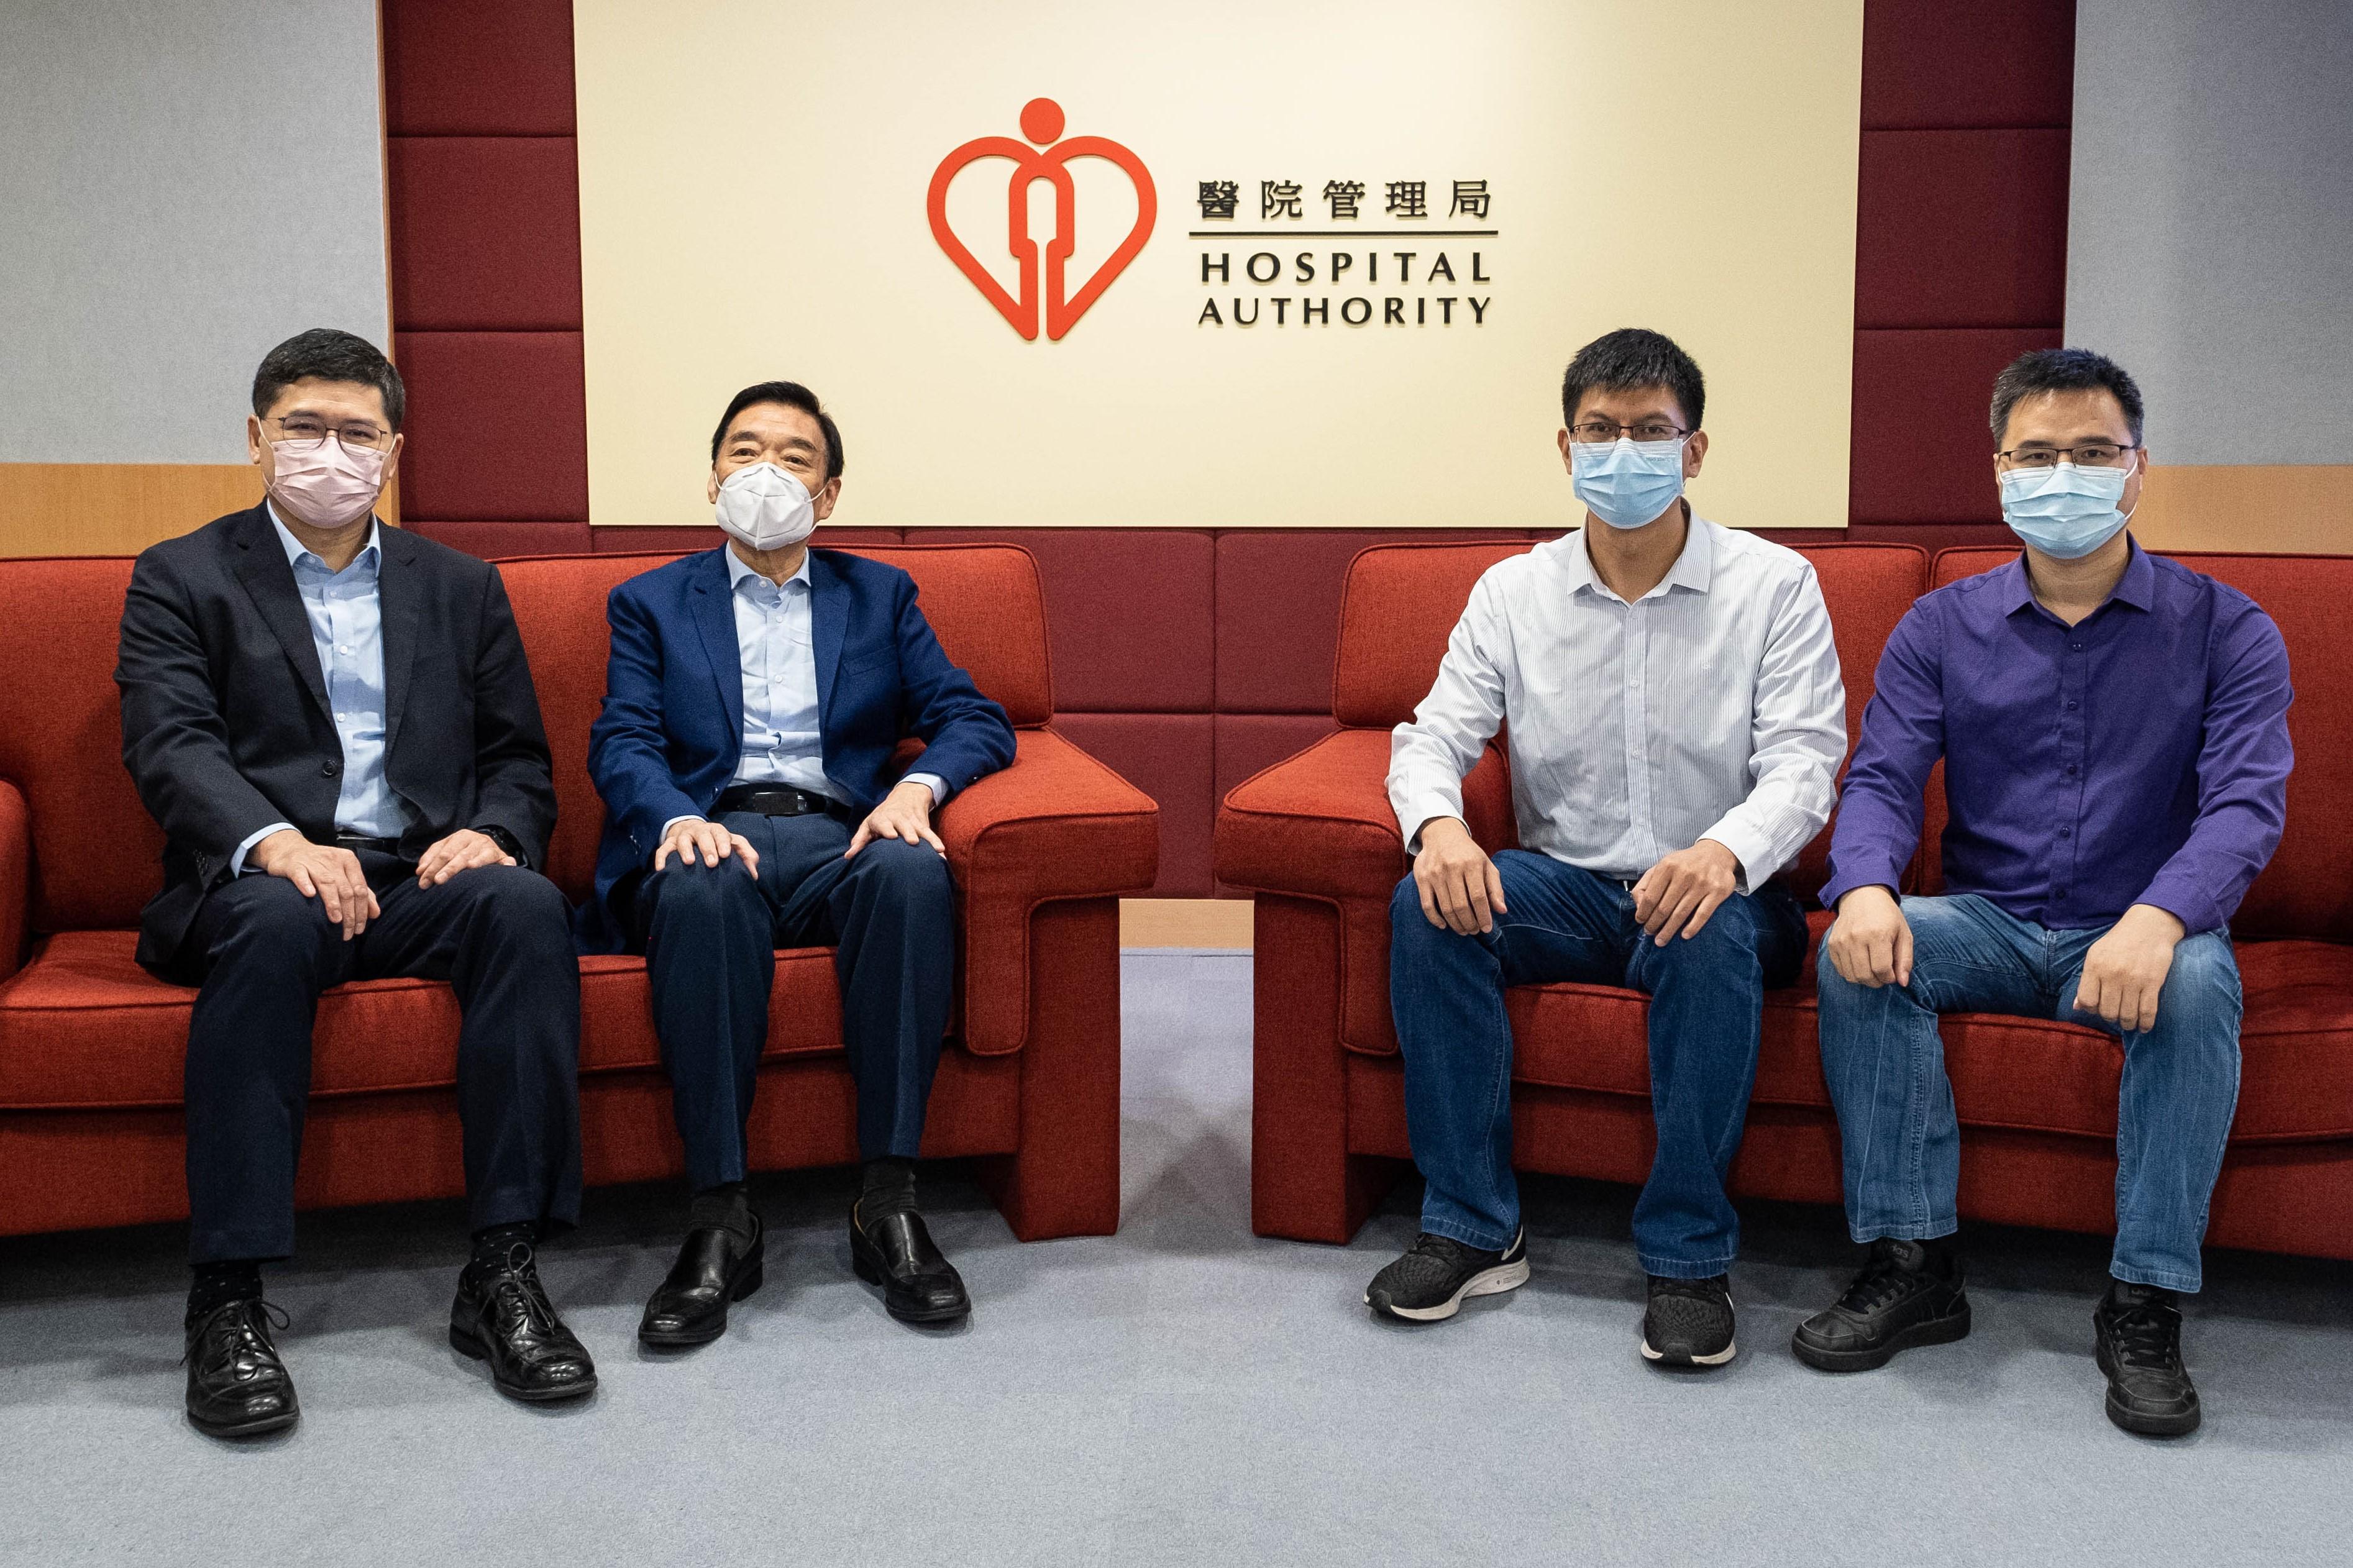 The Hospital Authority Chairman, Mr Henry Fan (second left), and the Chief Executive, Dr Tony Ko (first left), today (November 16) met with Chief Physician Xie Dongping (second right) and Associate Chief Physician Wu Guangping (first right), and expressed heartfelt appreciation to them for coming to Hong Kong to participate in the "Greater Bay Area Chinese Medicine Visiting Scholars Programme".